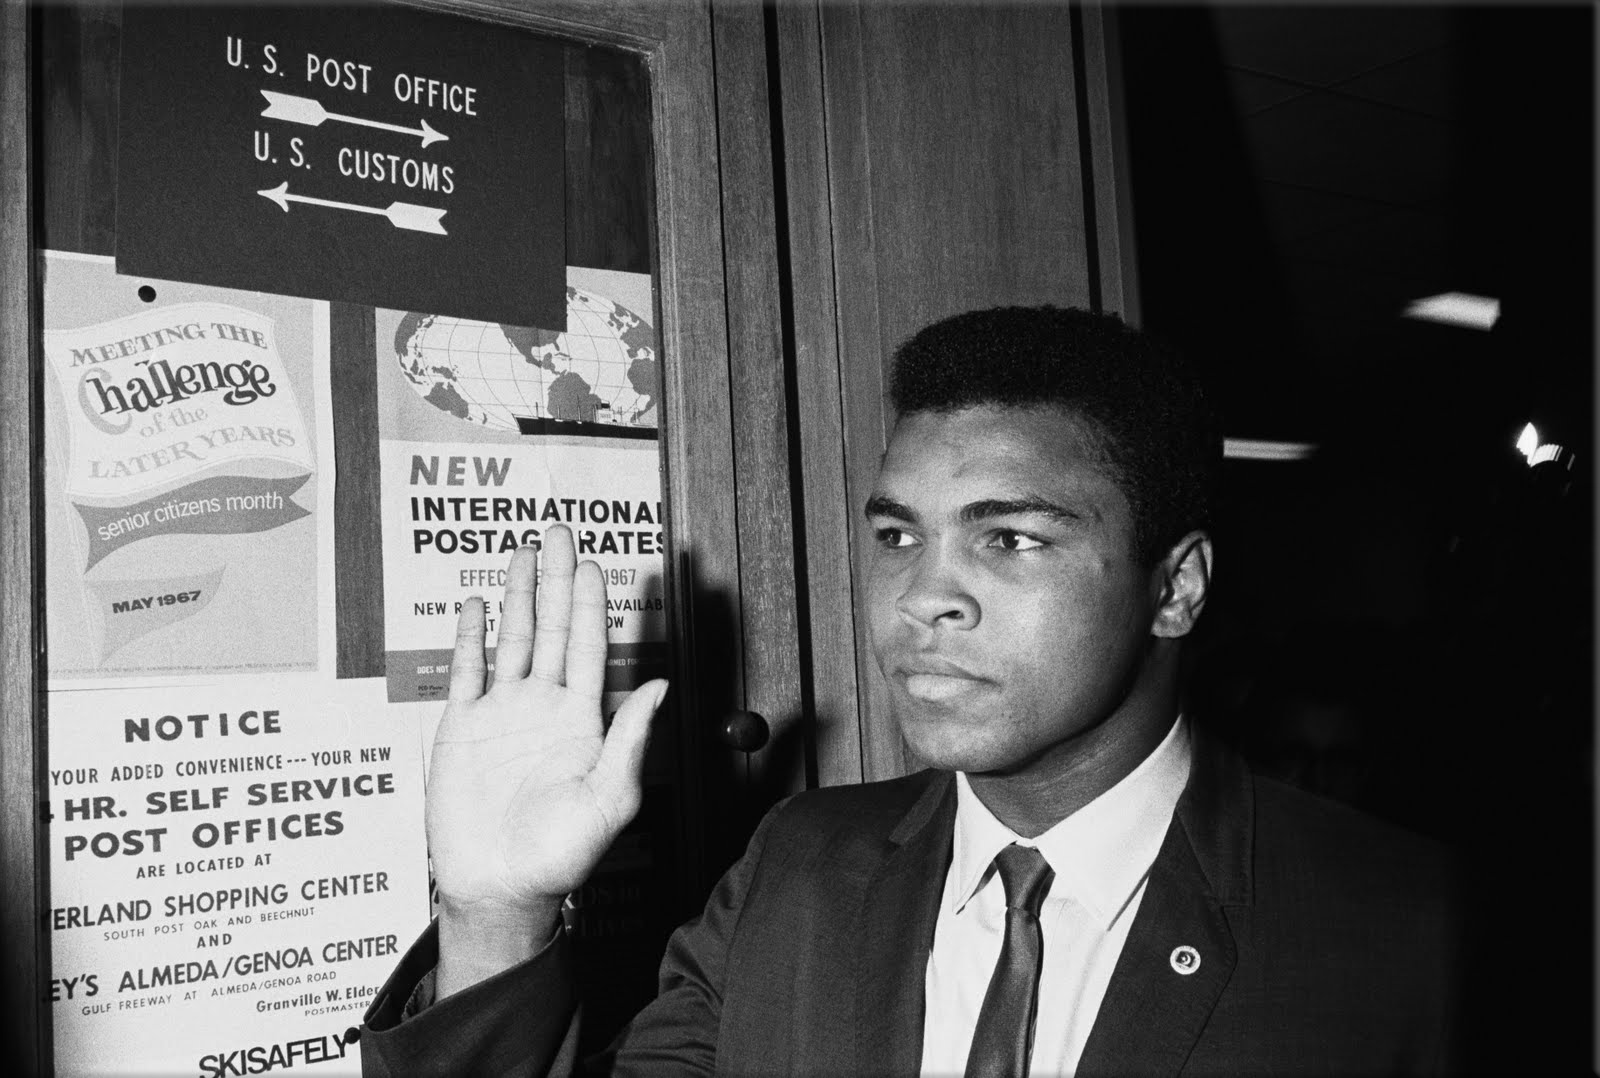 Muhammad Ali after The World Boxing Association Stripped Of His Heavyweight Championship, 1967